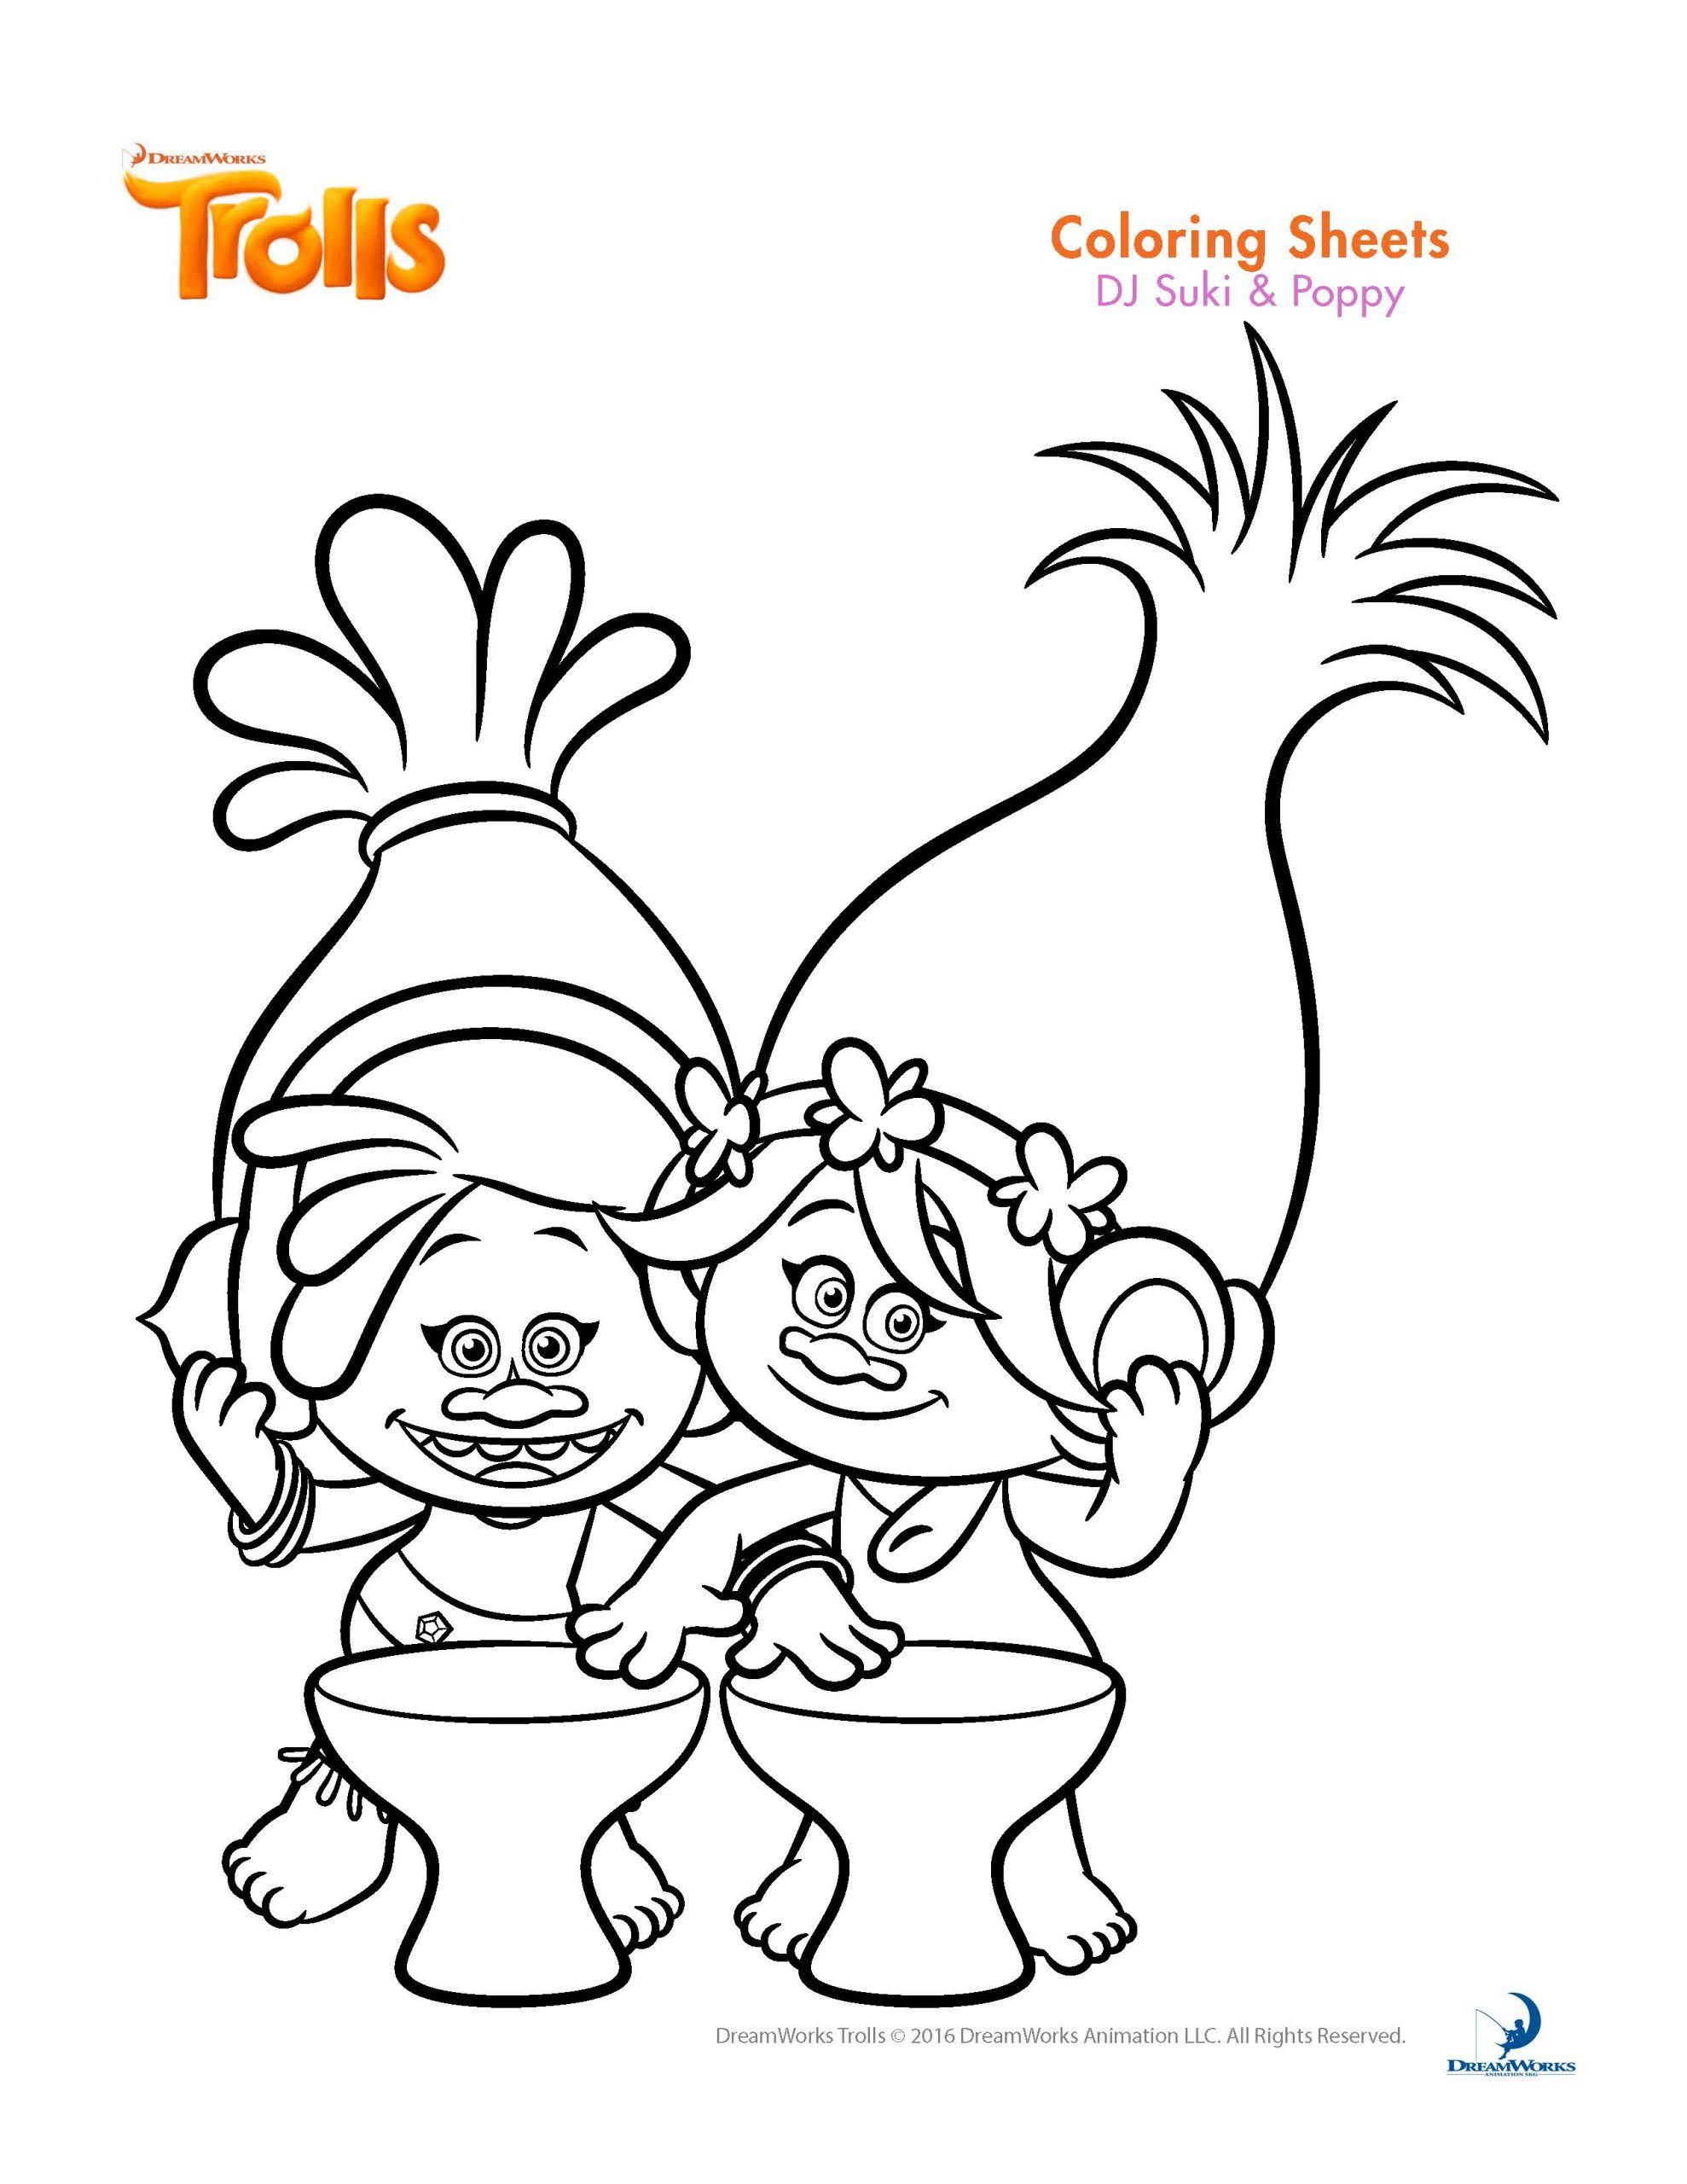 lets coloring: 47 Printable Trolls Coloring Pages Image Ideas ...